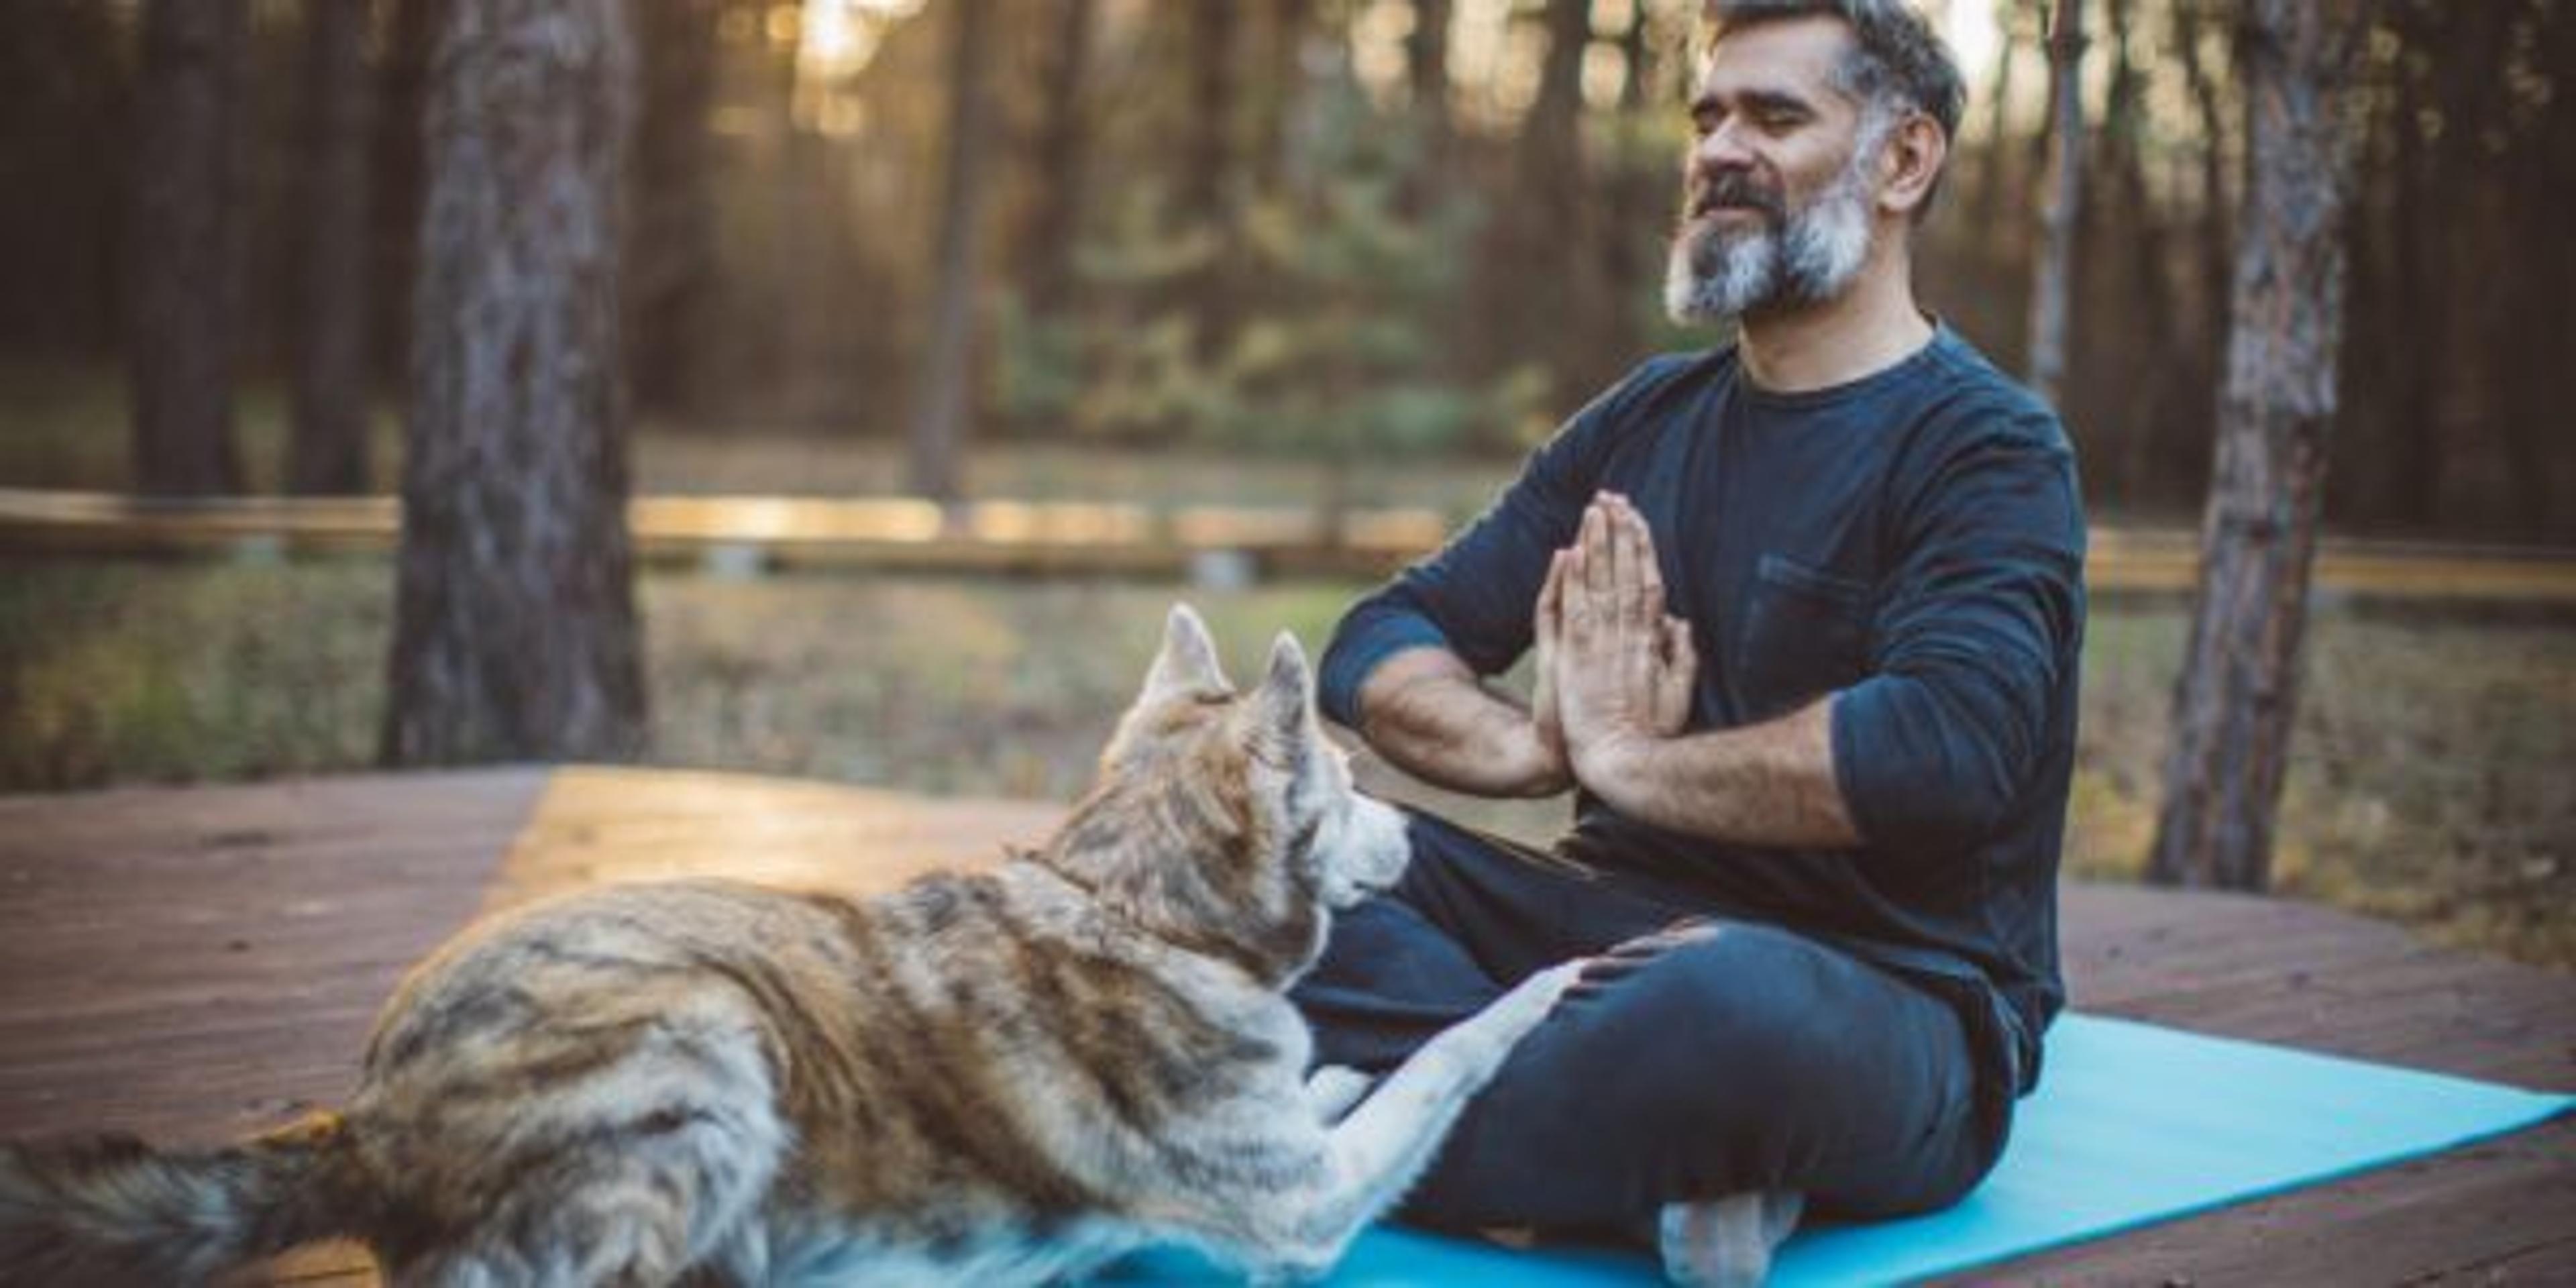 Man going through andropause doing backyard yoga at home with dog